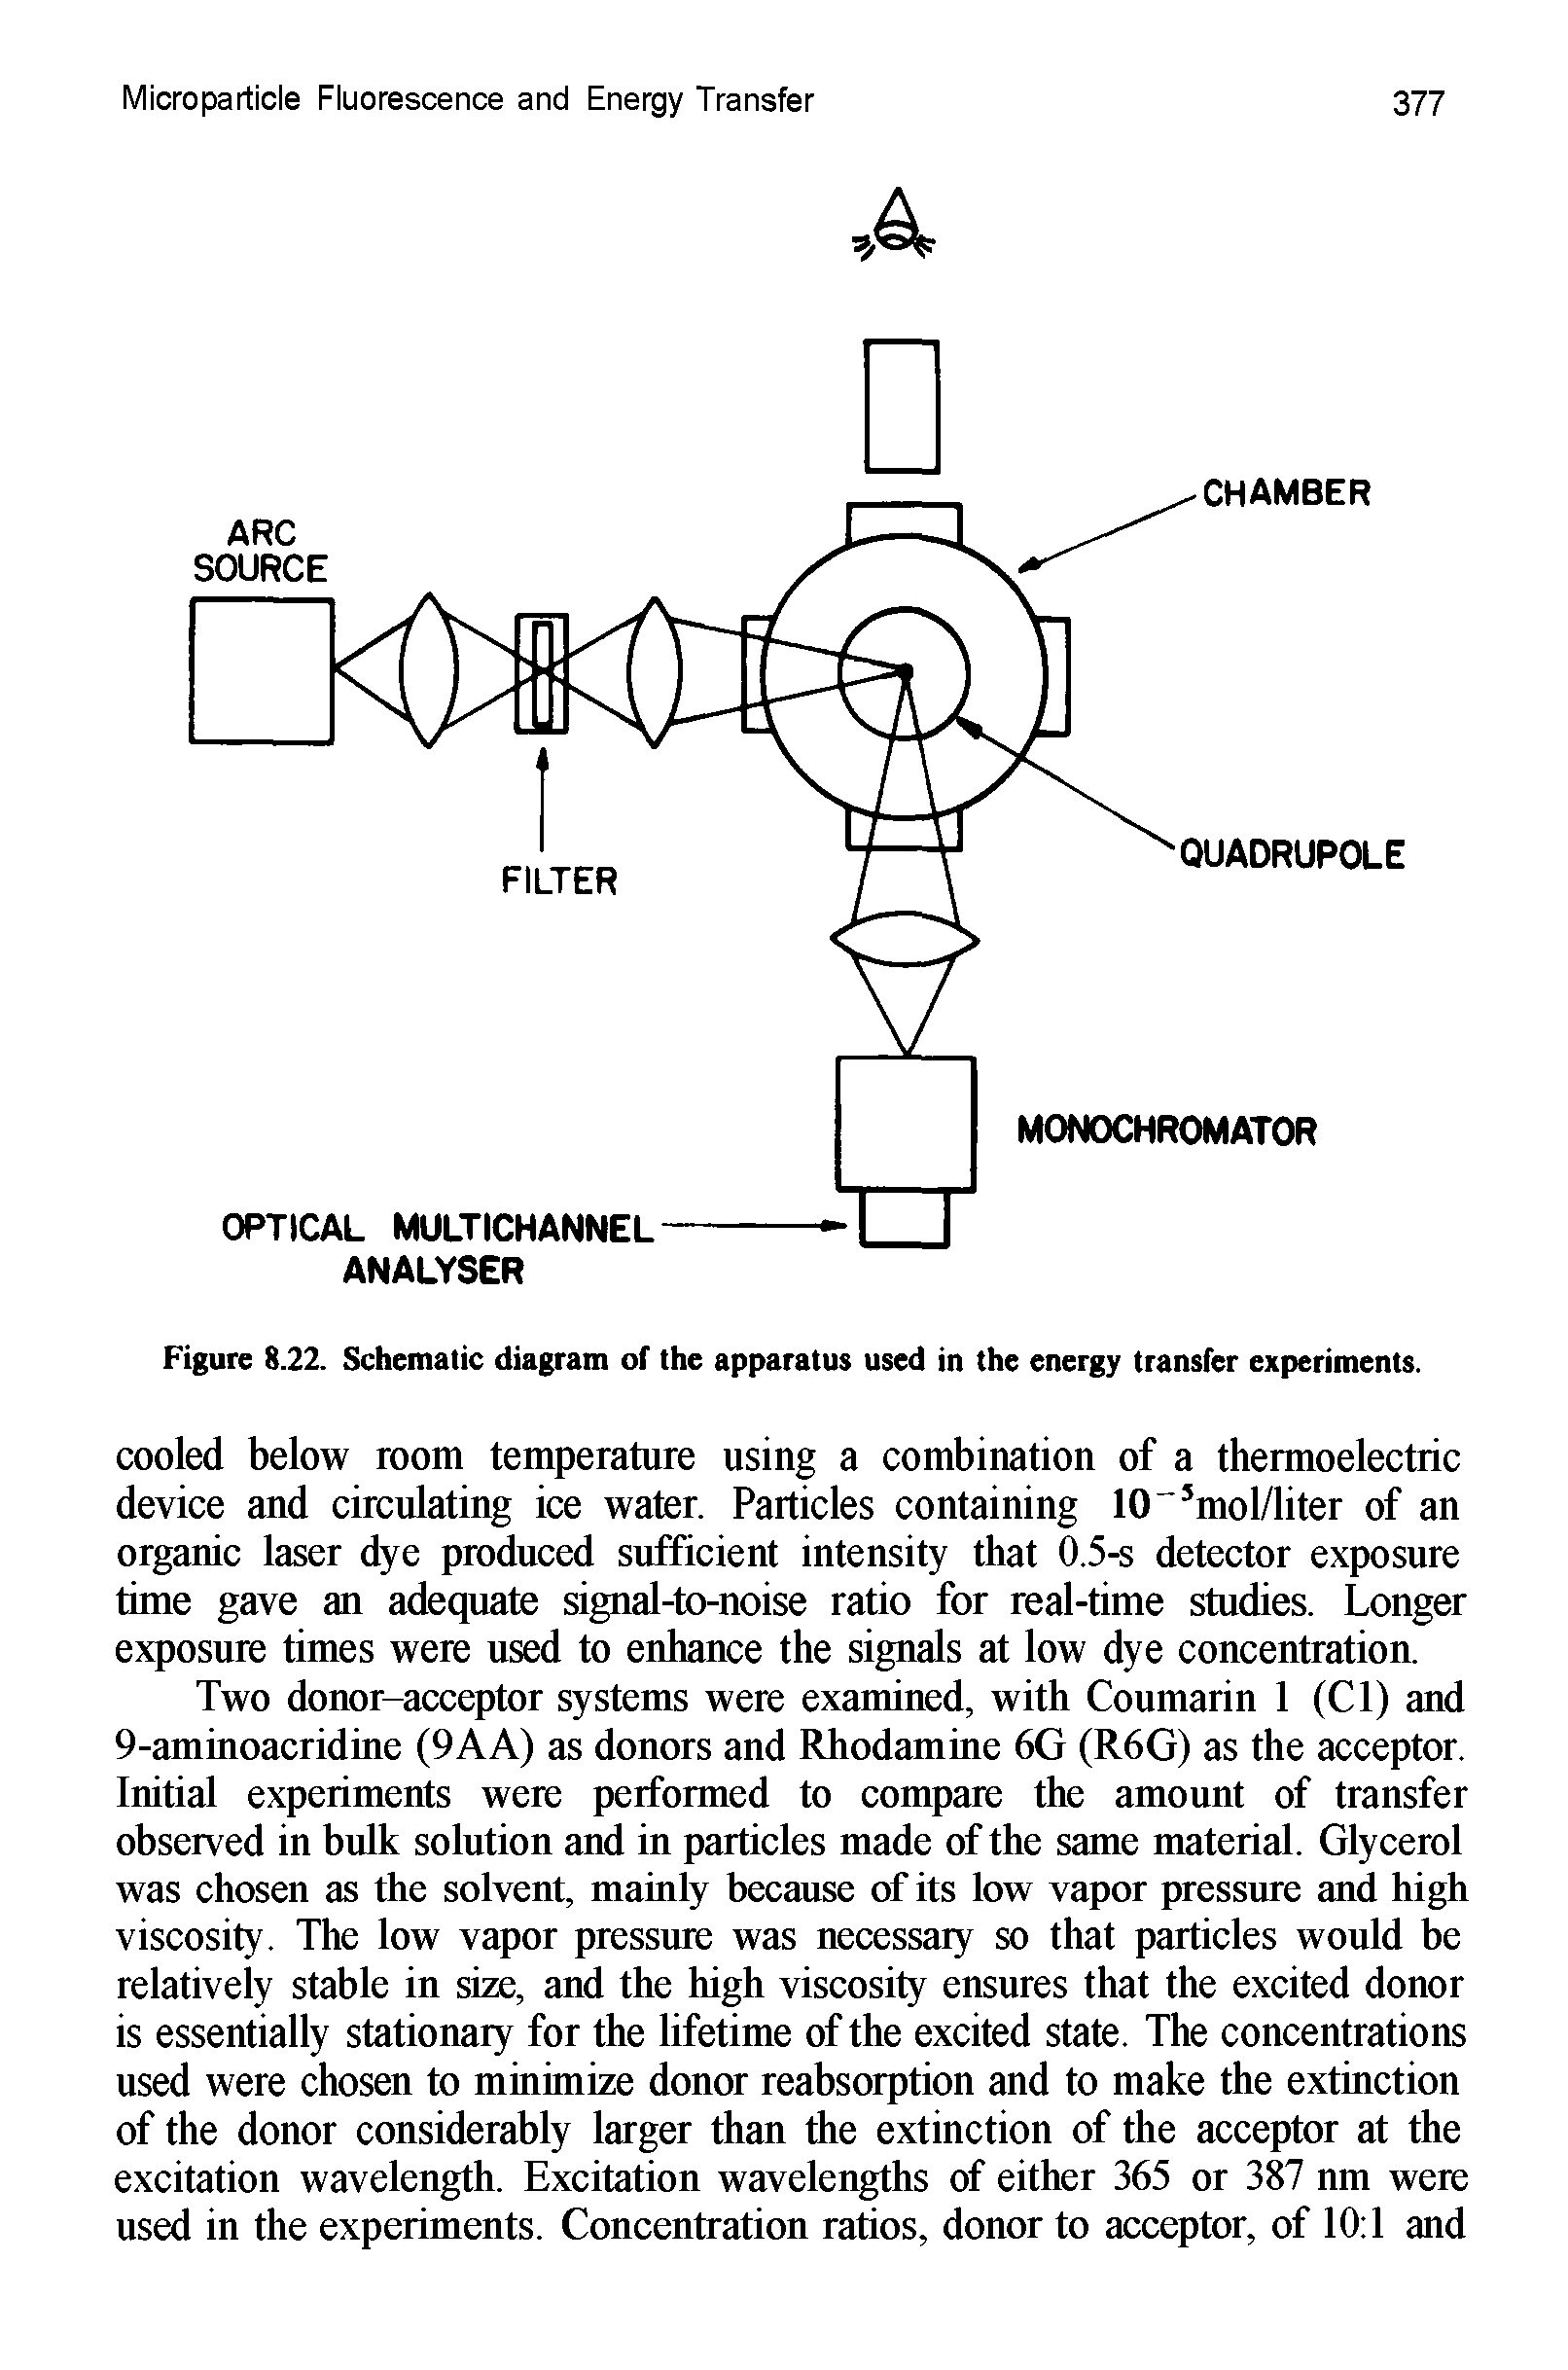 Figure 8.22. Schematic diagram of the apparatus used in the energy transfer experiments.